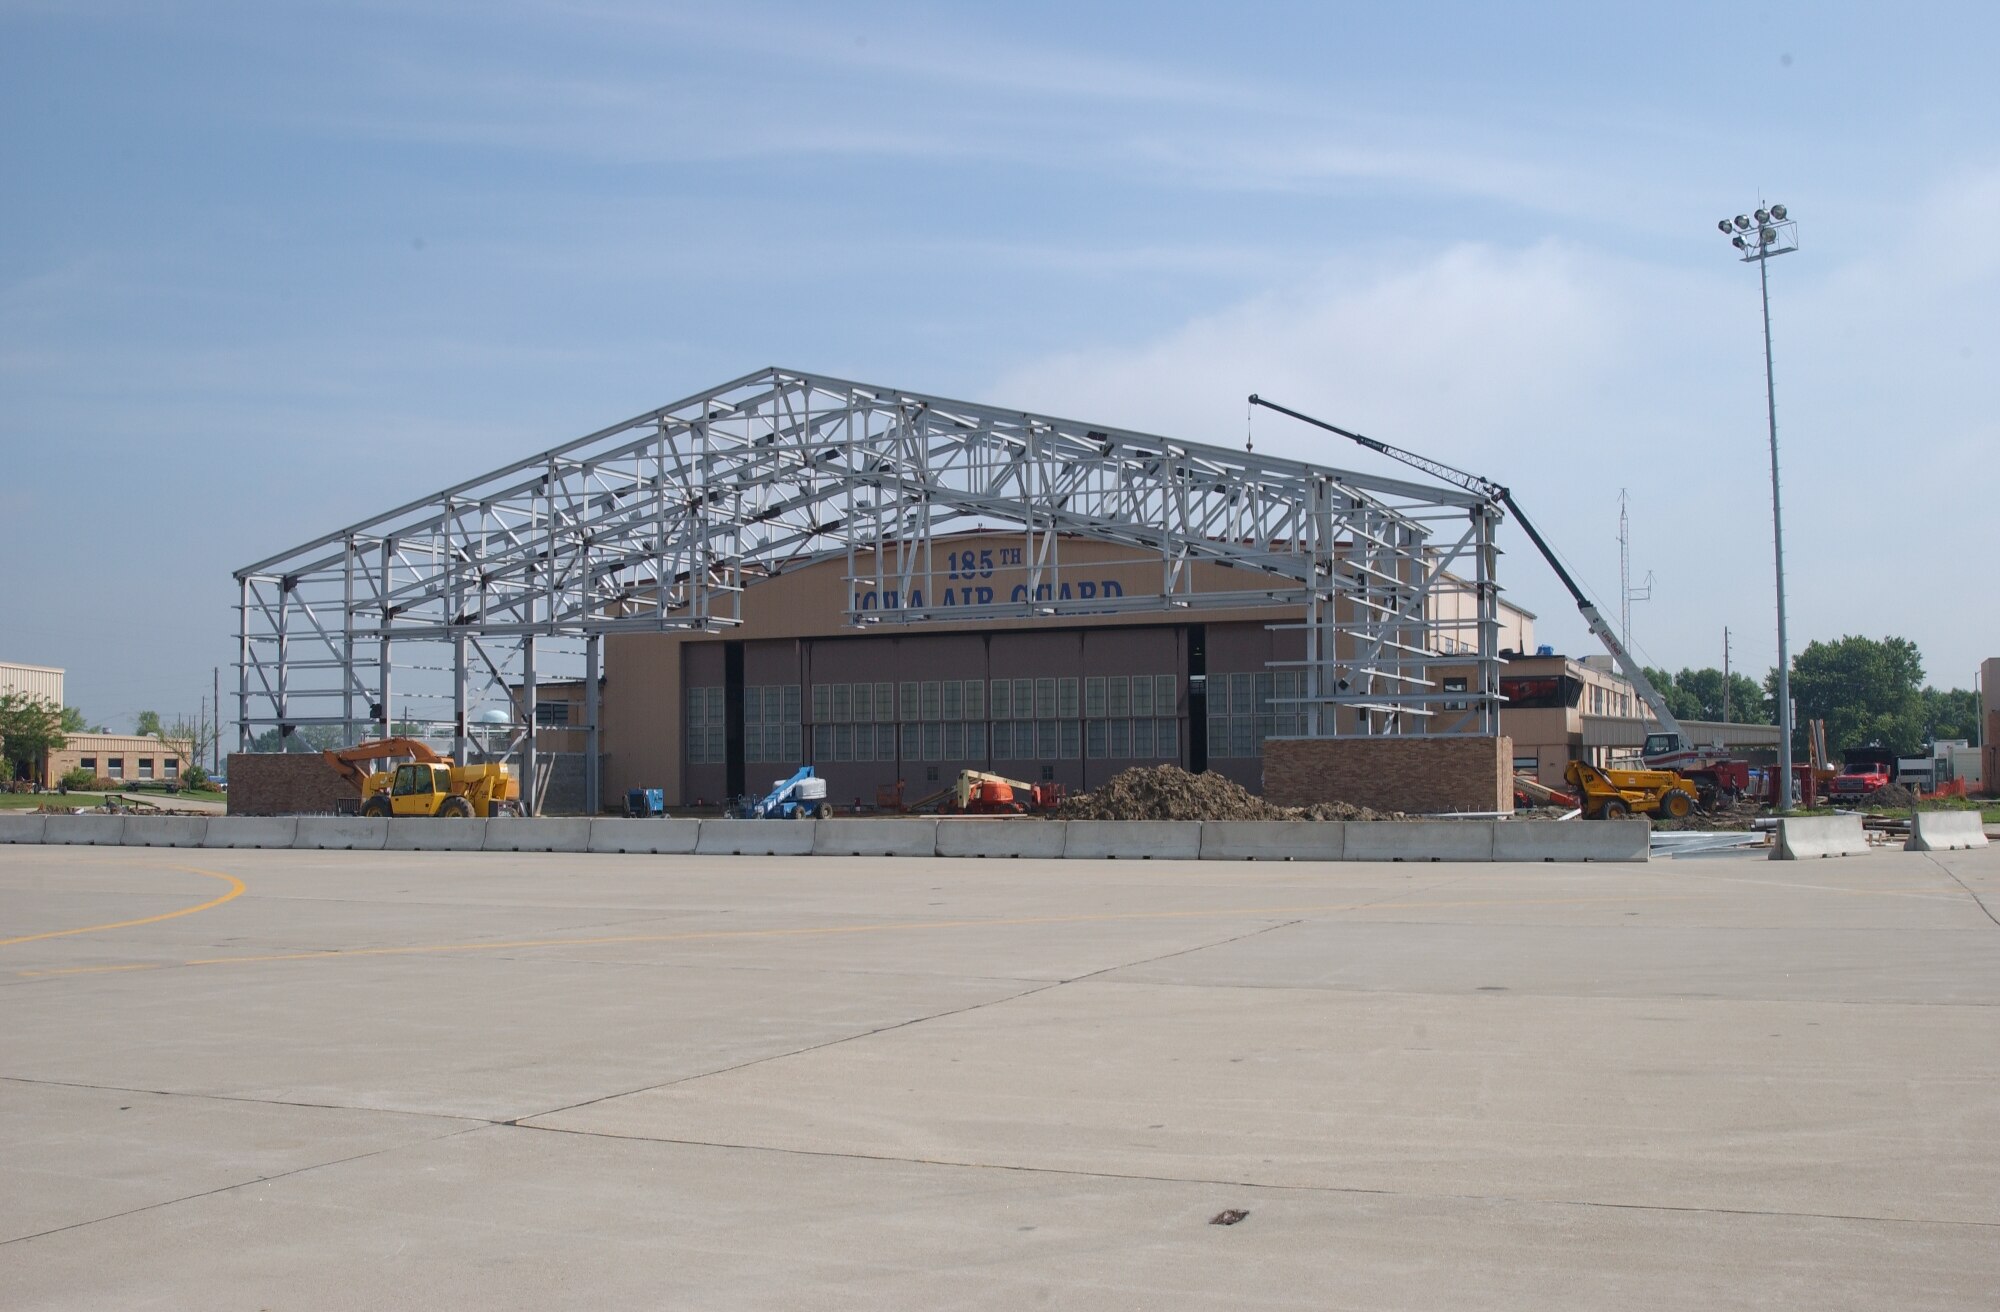 Construction of a large addition to the main hangar at the Iowa Air National Guard